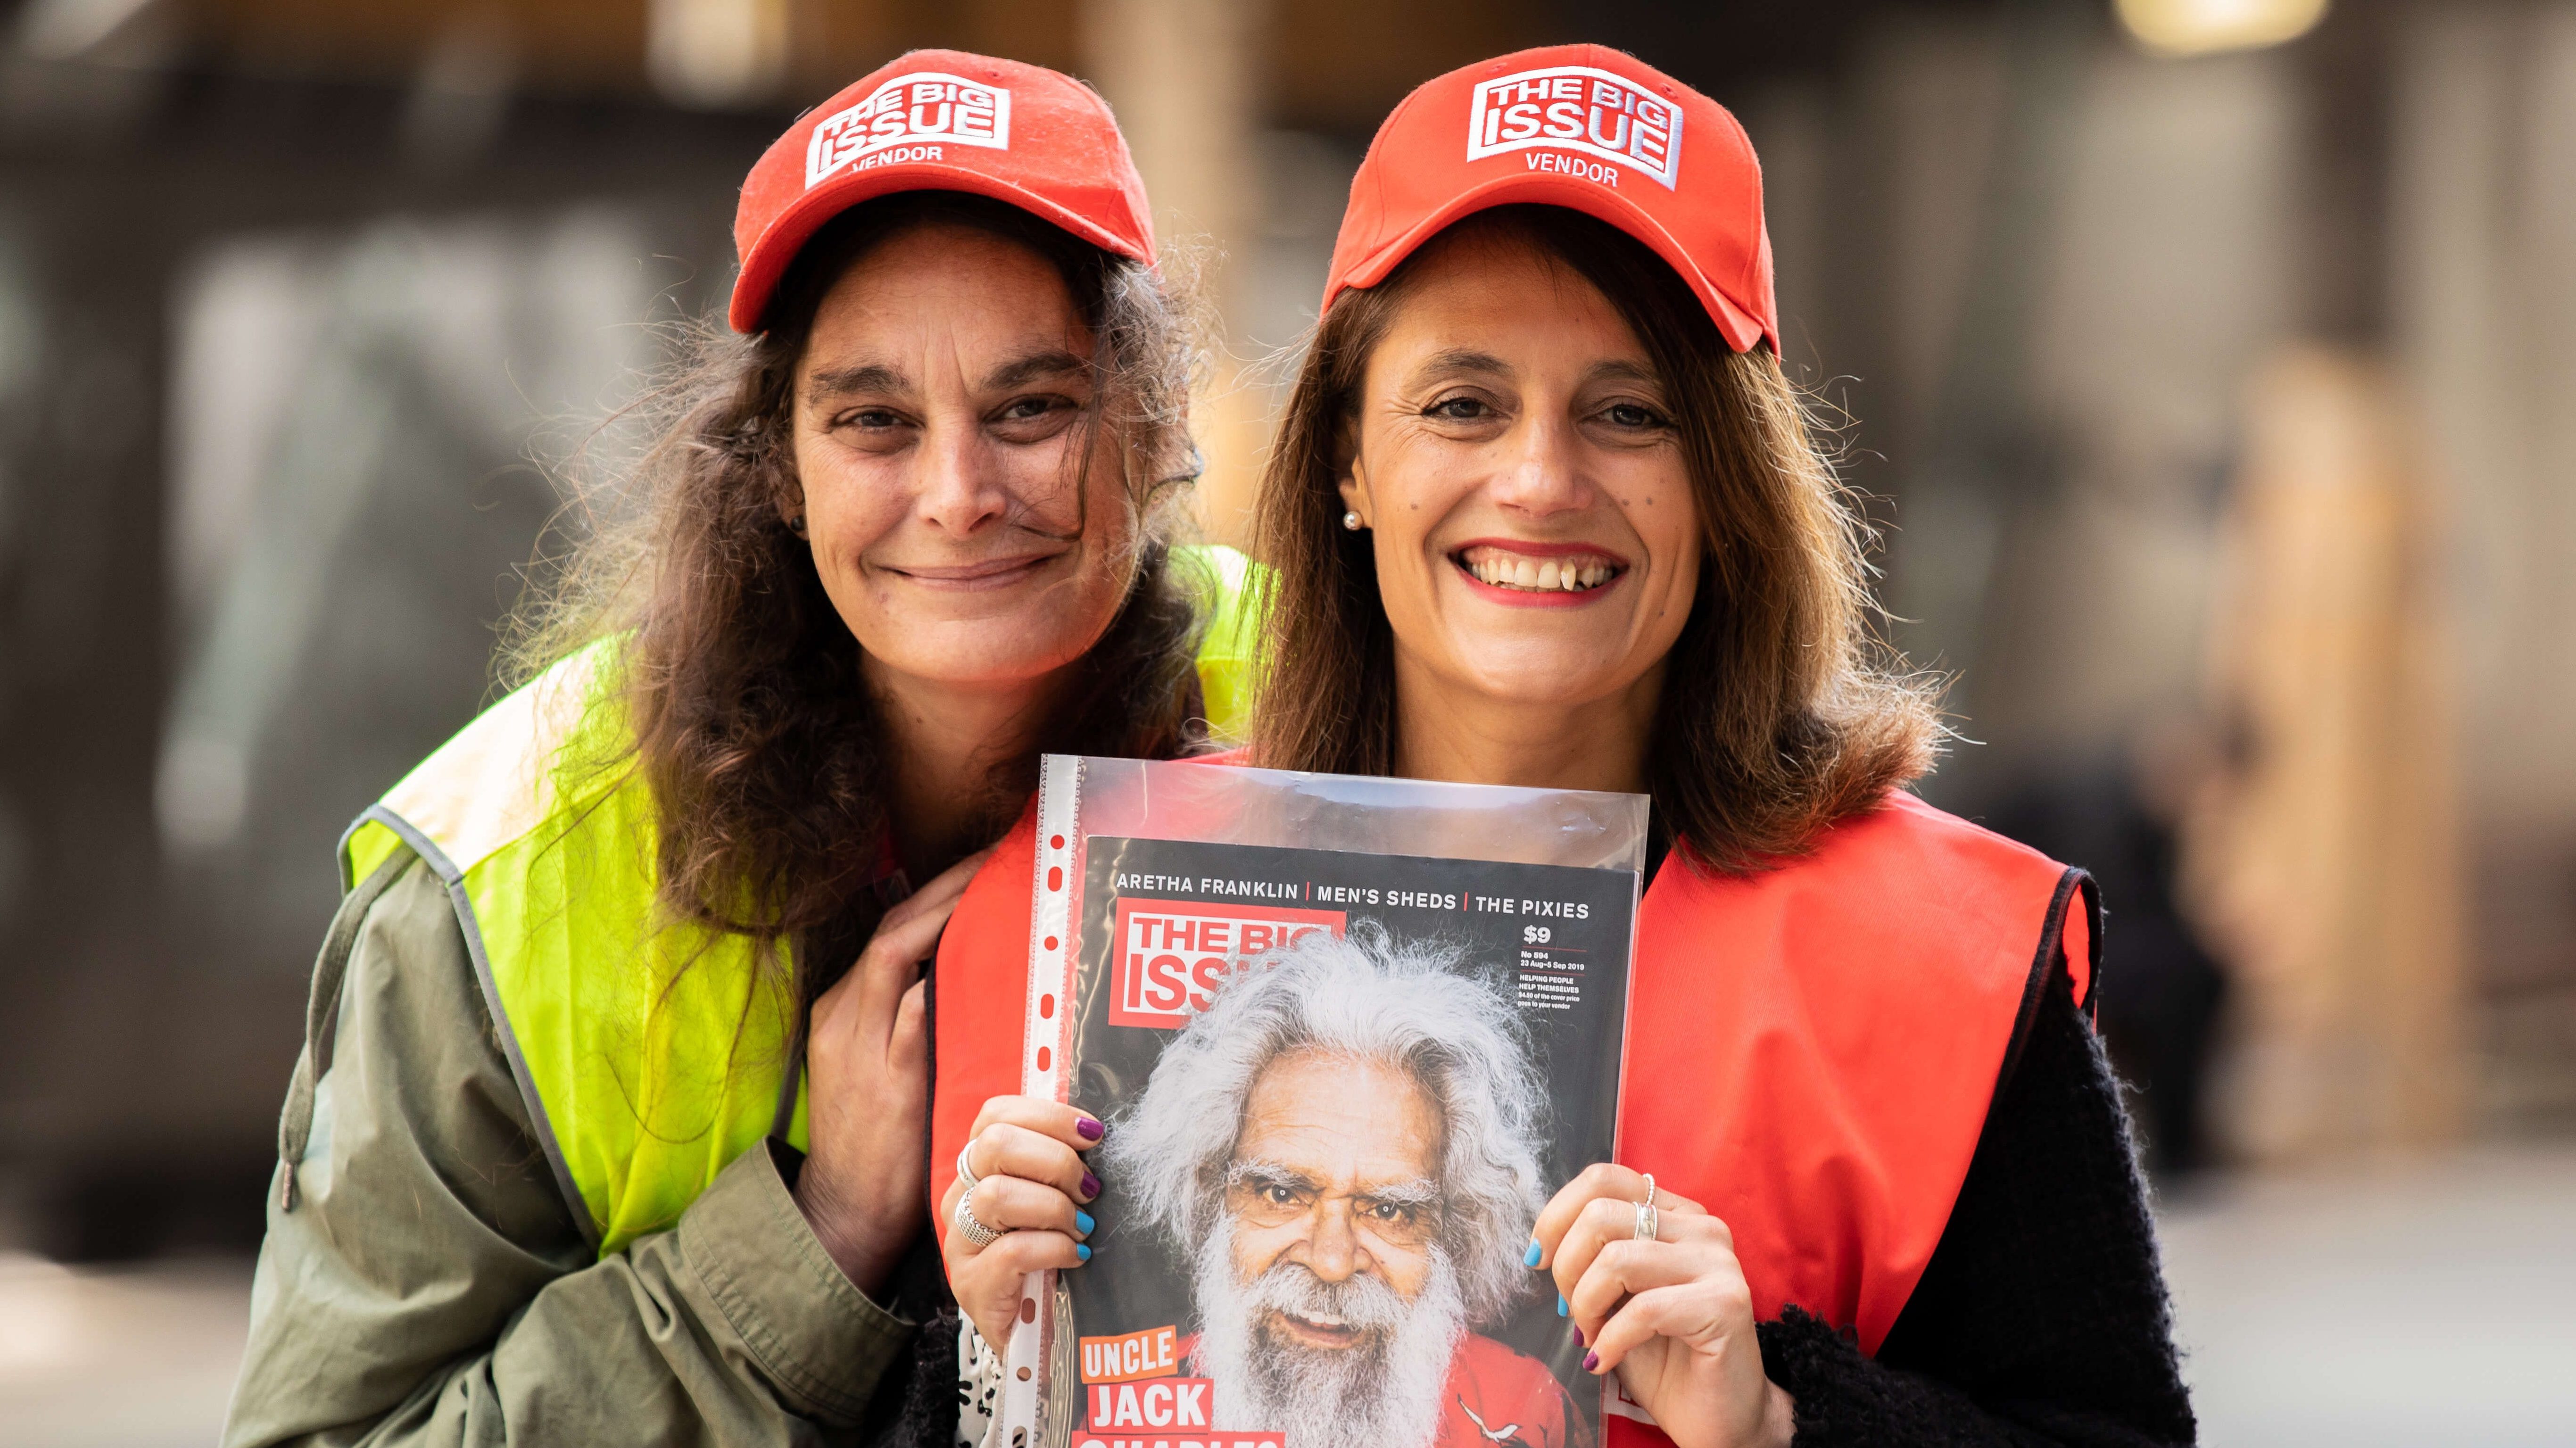 PAYCE take on ‘The Big Issue’ Corporate Challenge